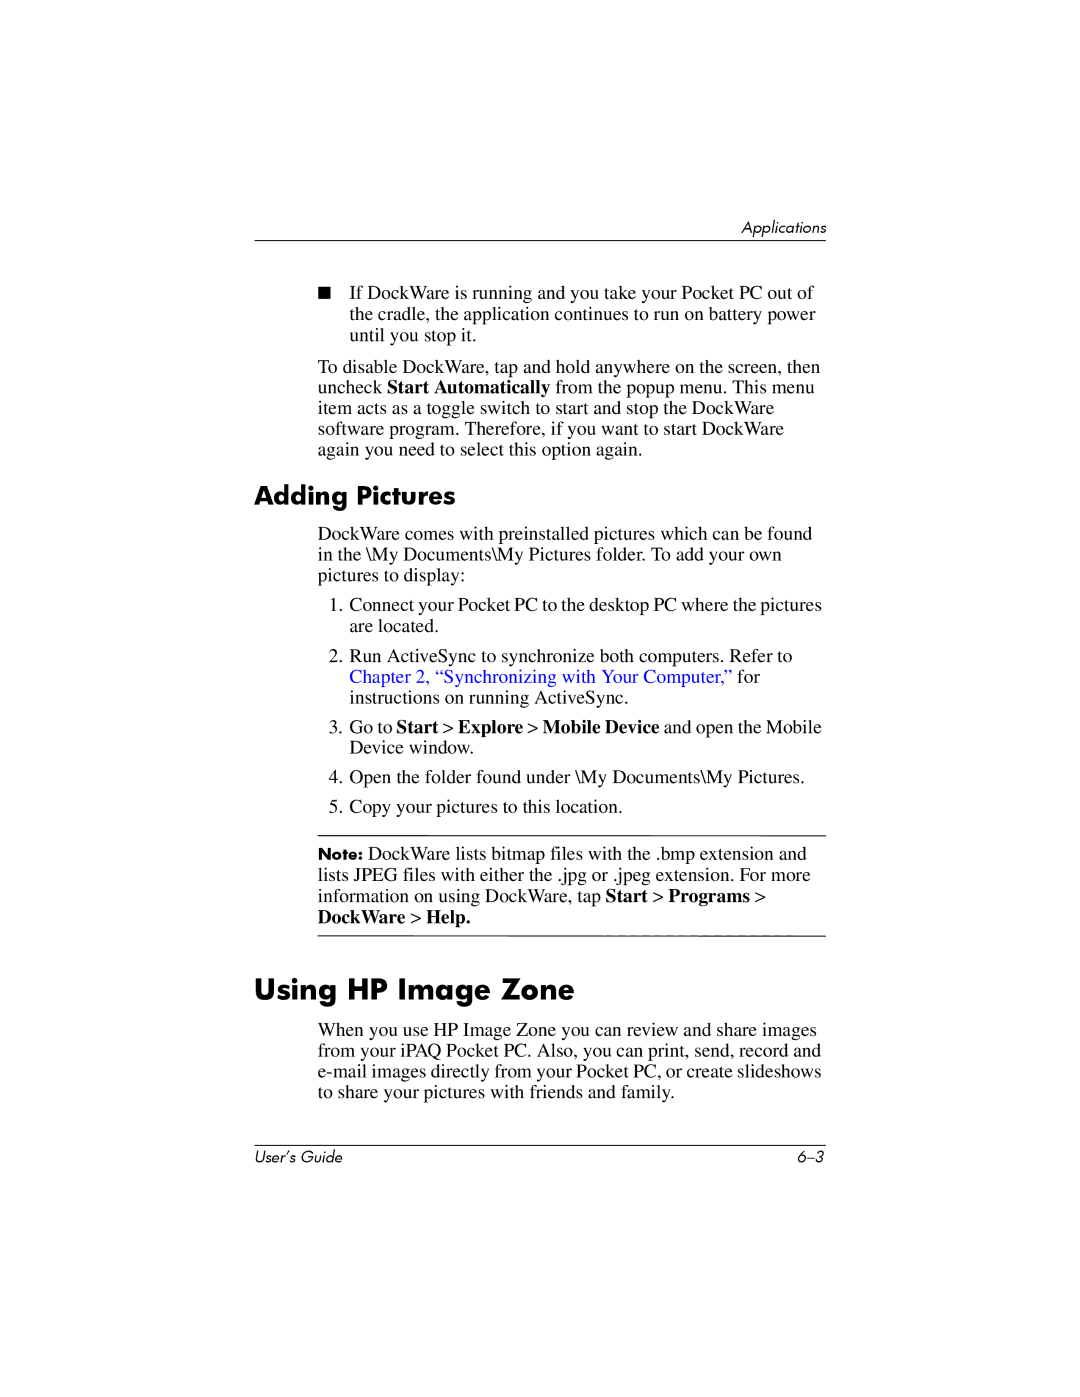 HP hx4700 manual Using HP Image Zone, Adding Pictures 